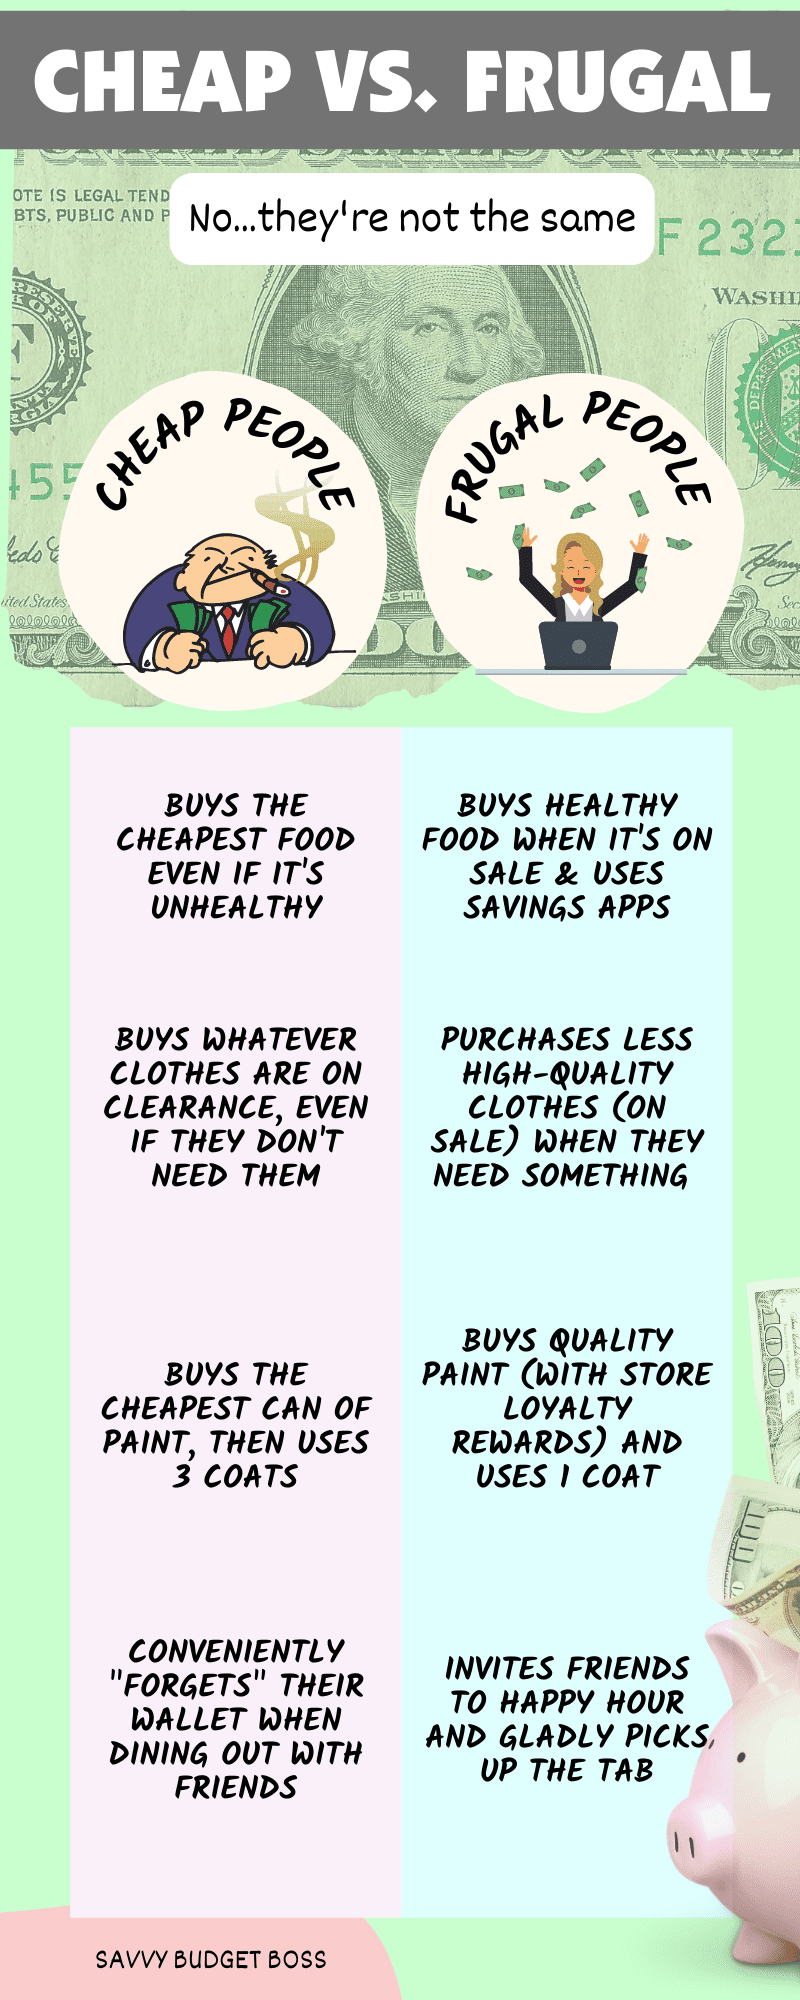 Infographic showing the differences between a cheap person and an frugal person